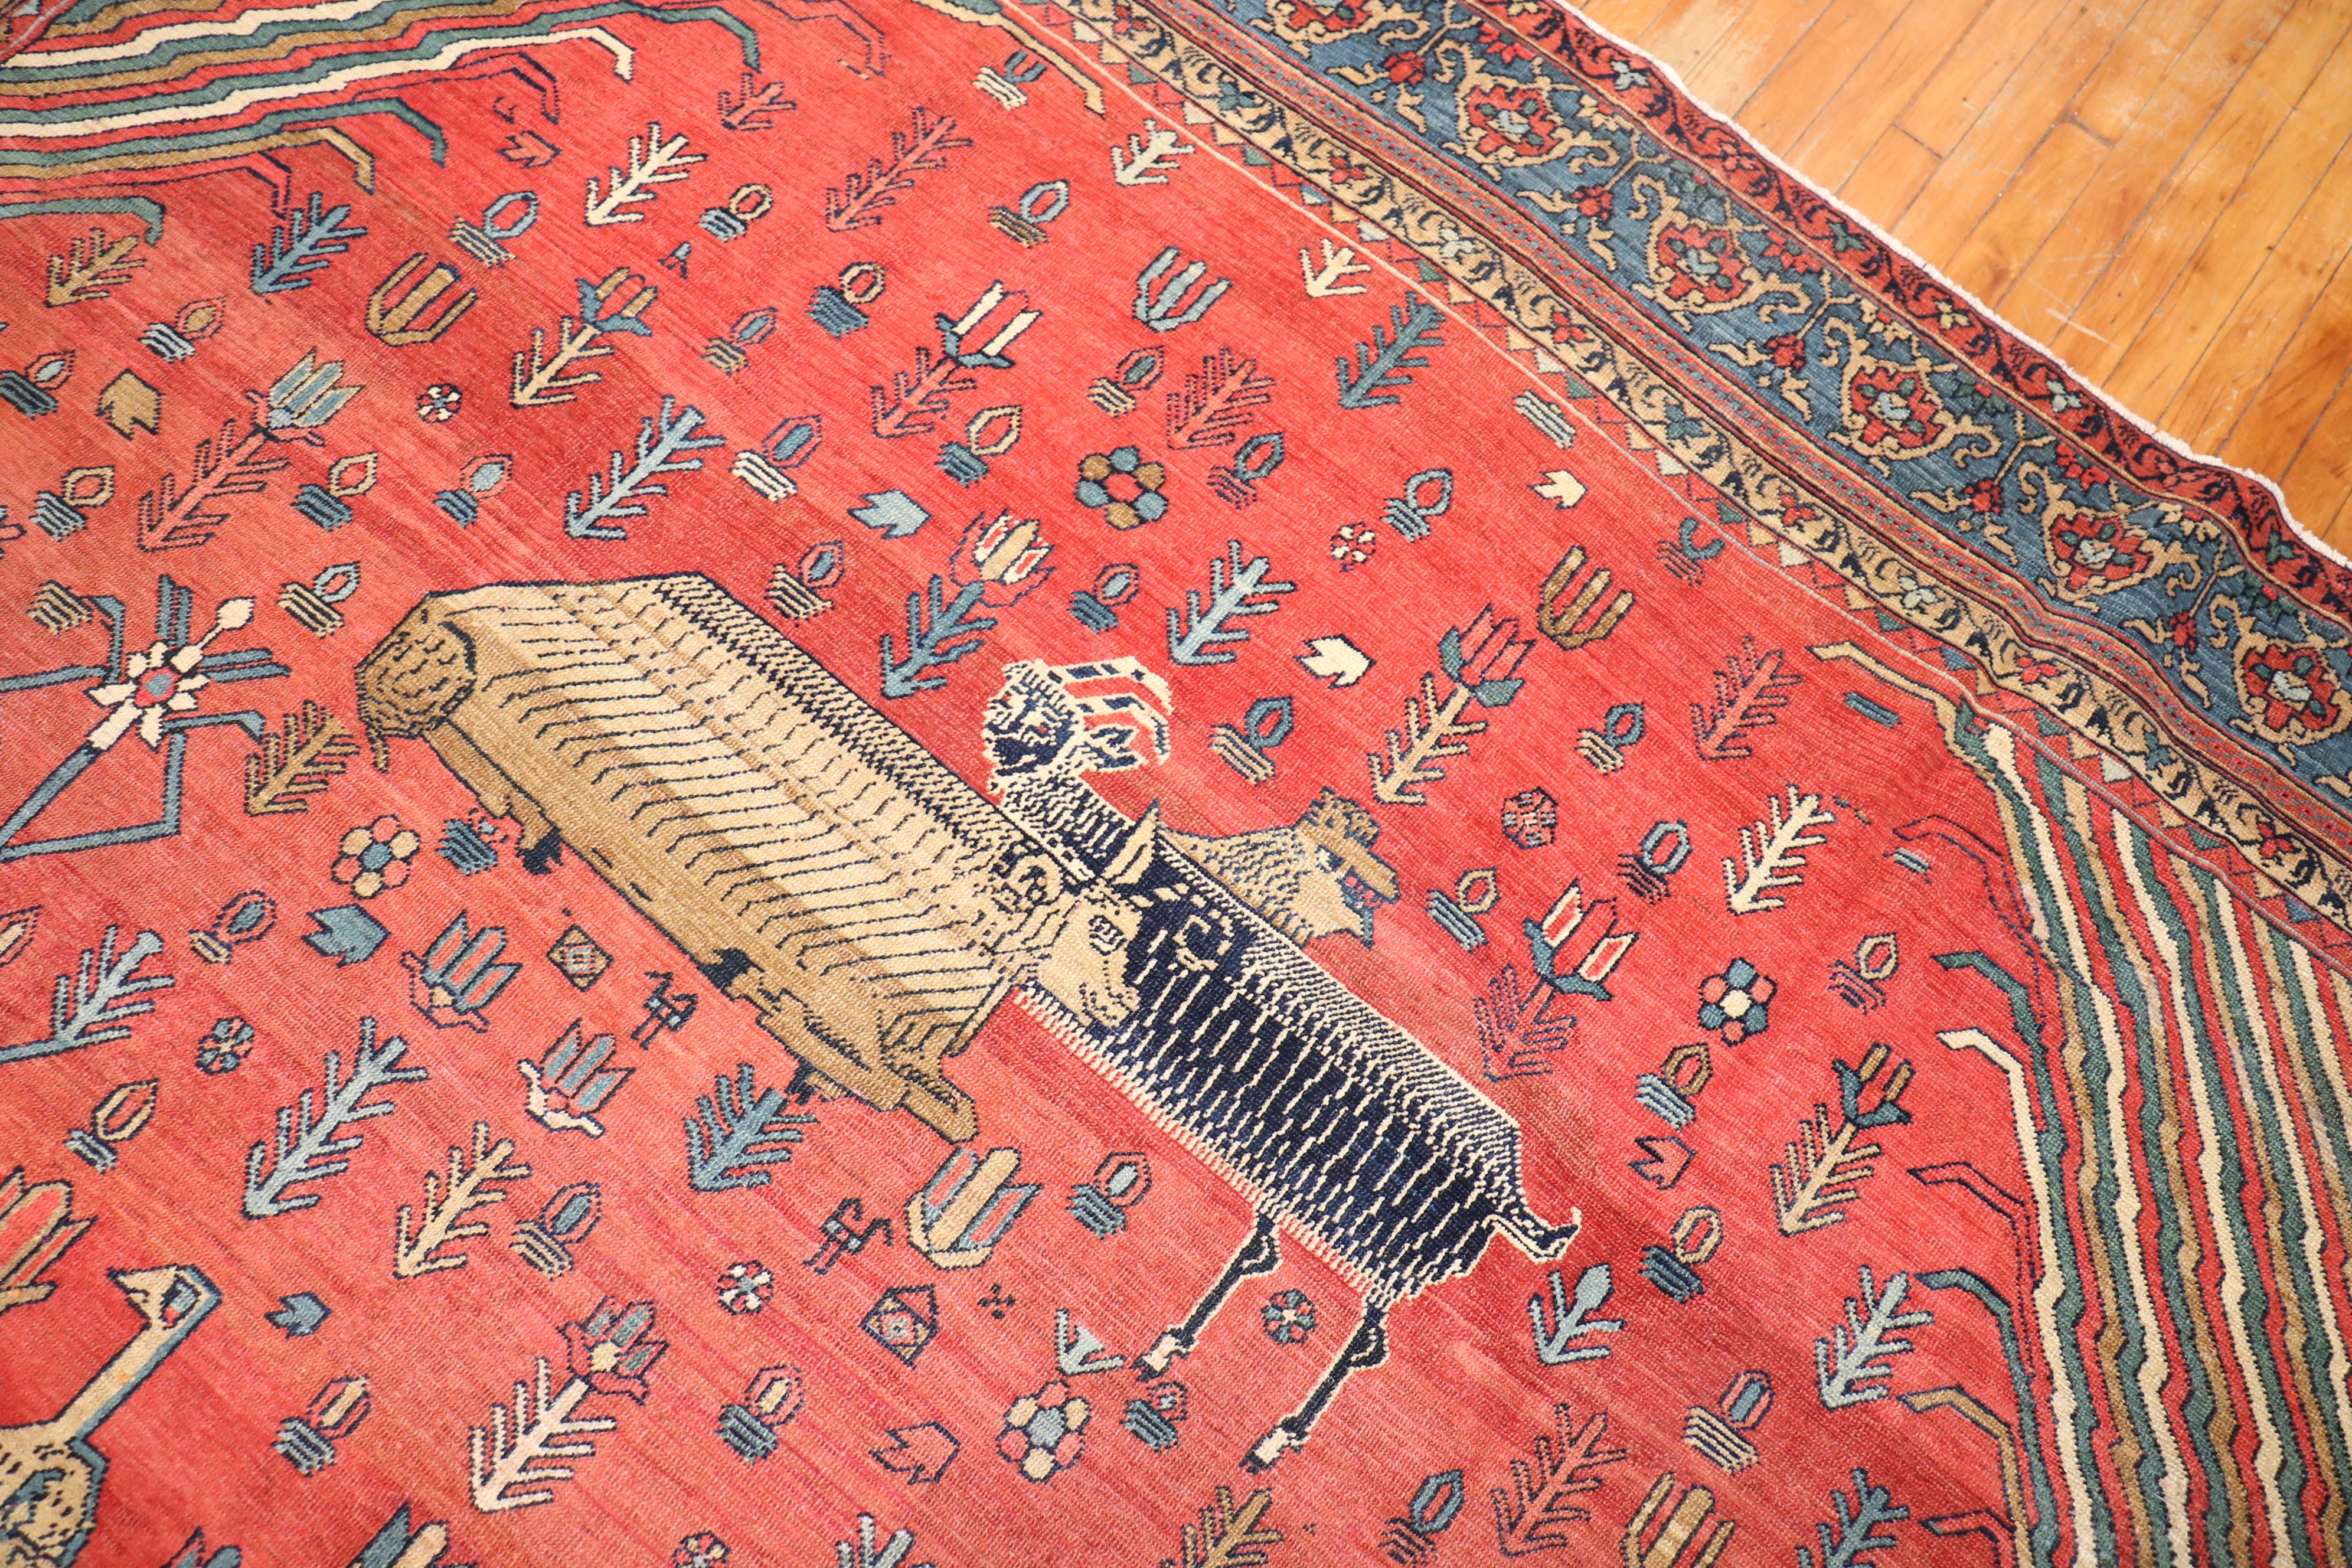 Pictorial Bakshaish Animal Motif Rug In Good Condition For Sale In New York, NY